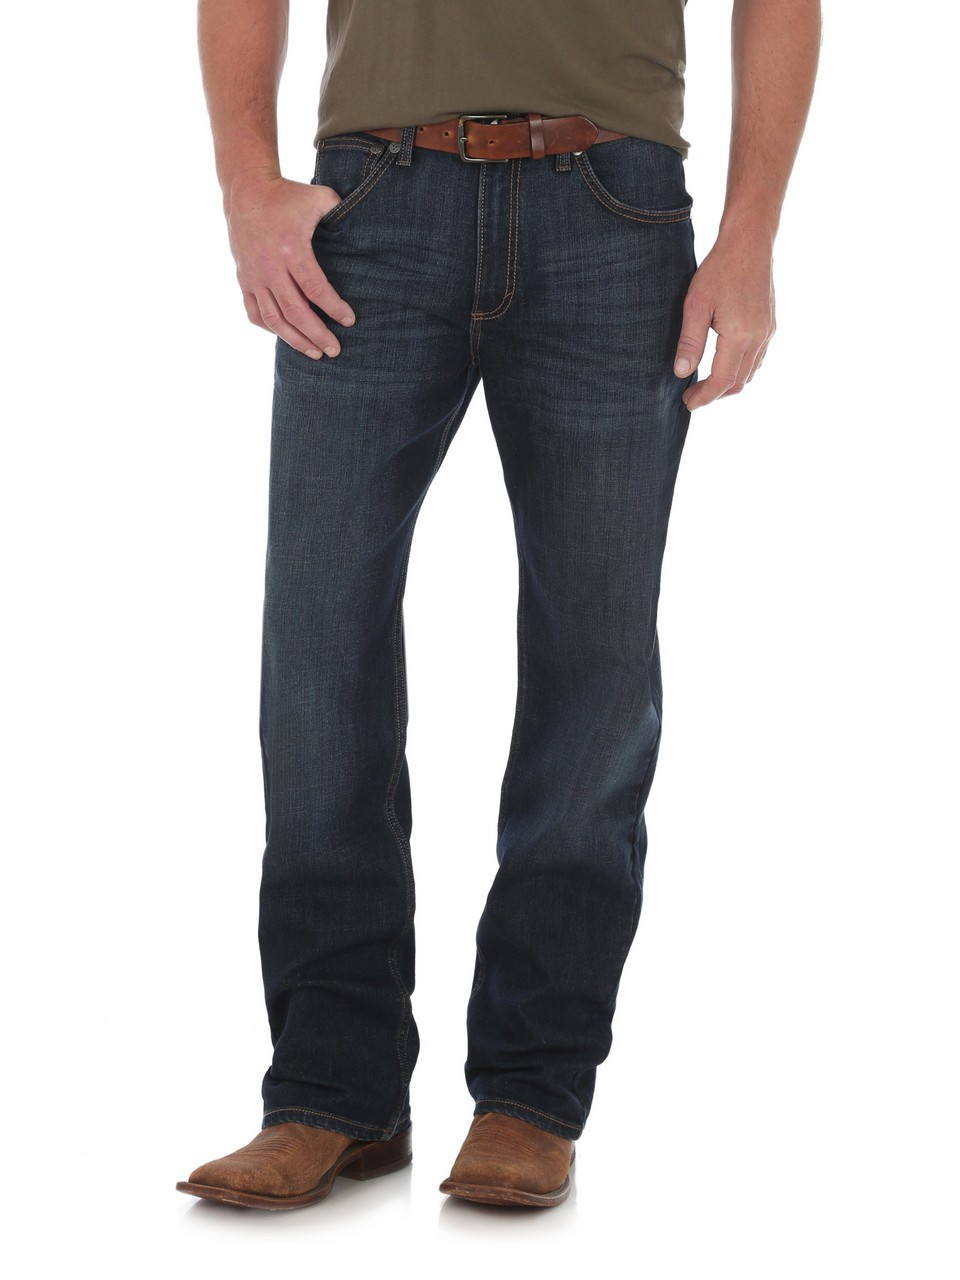 Wrangler 20X® Men's No. 33 Relaxed Fit Jeans